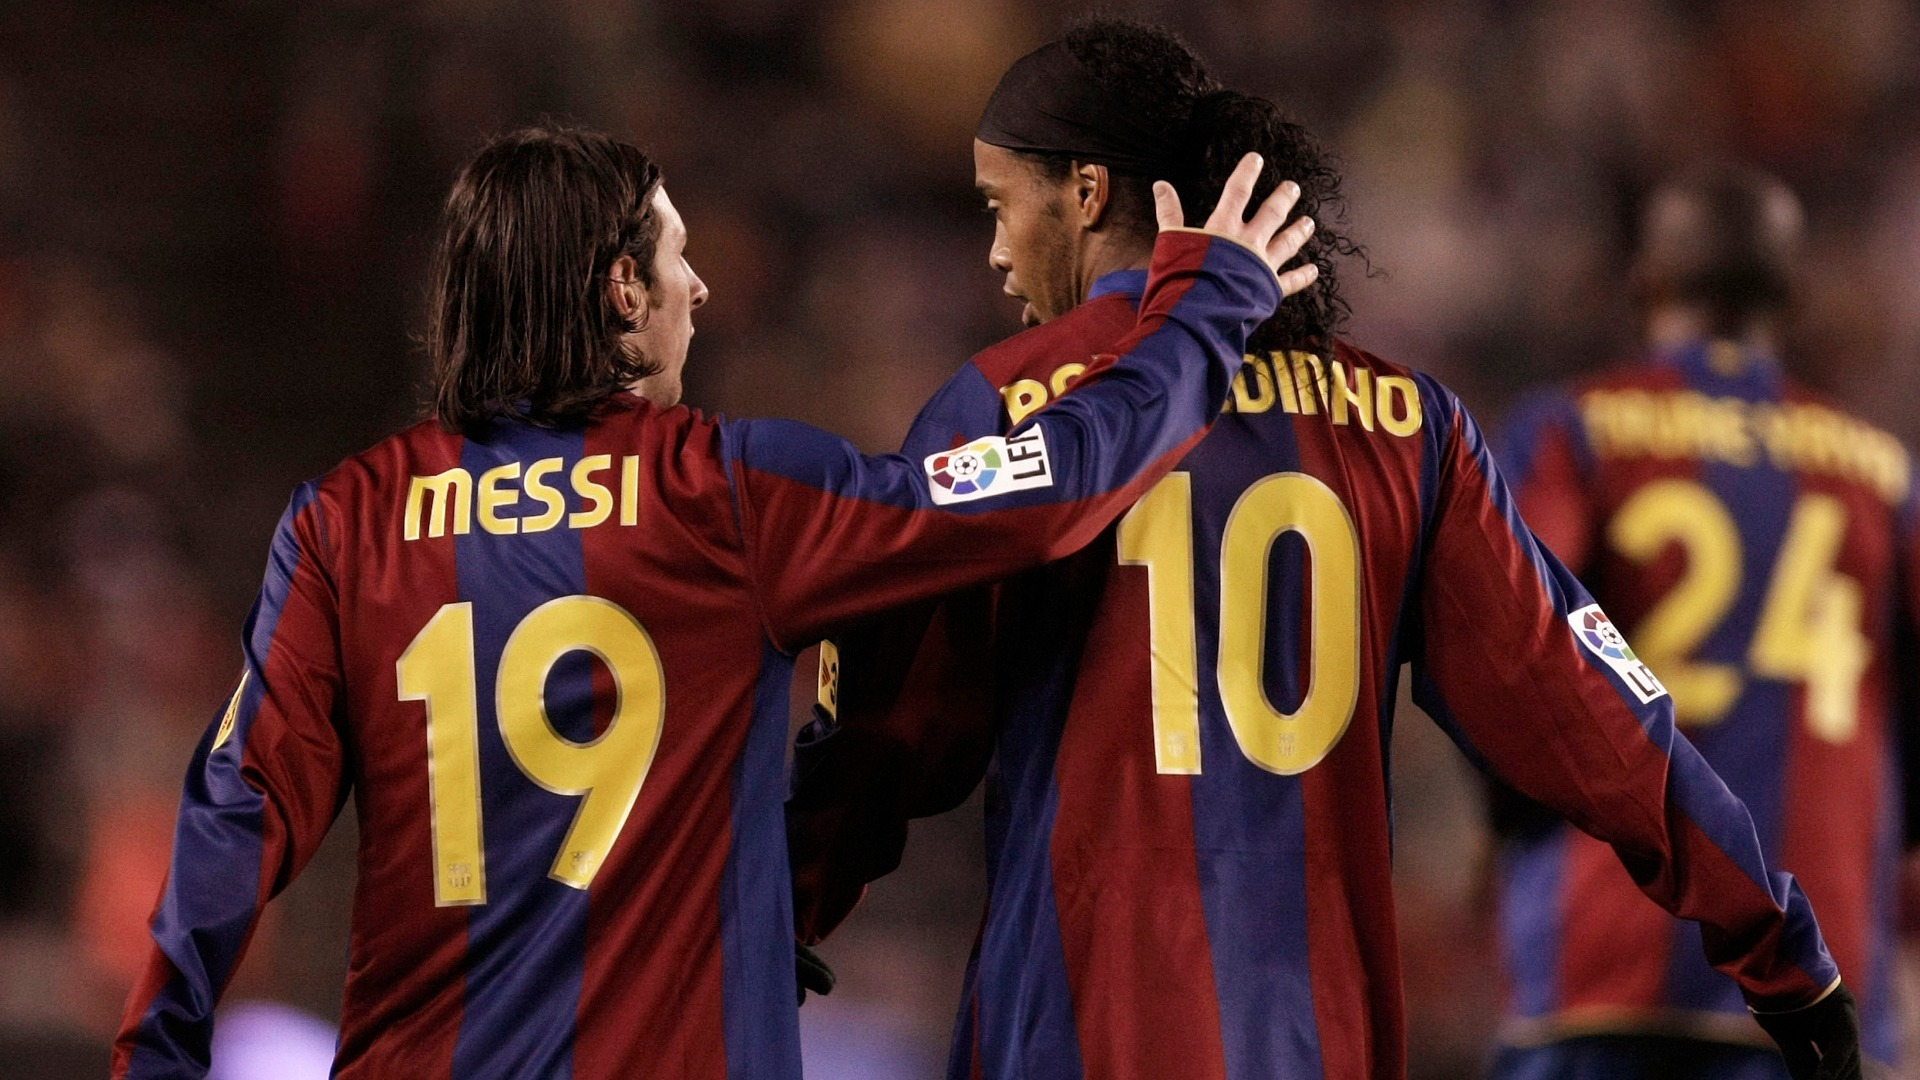 Messi and Ronaldinho wallpaper by BG10  Download on ZEDGE  ead0